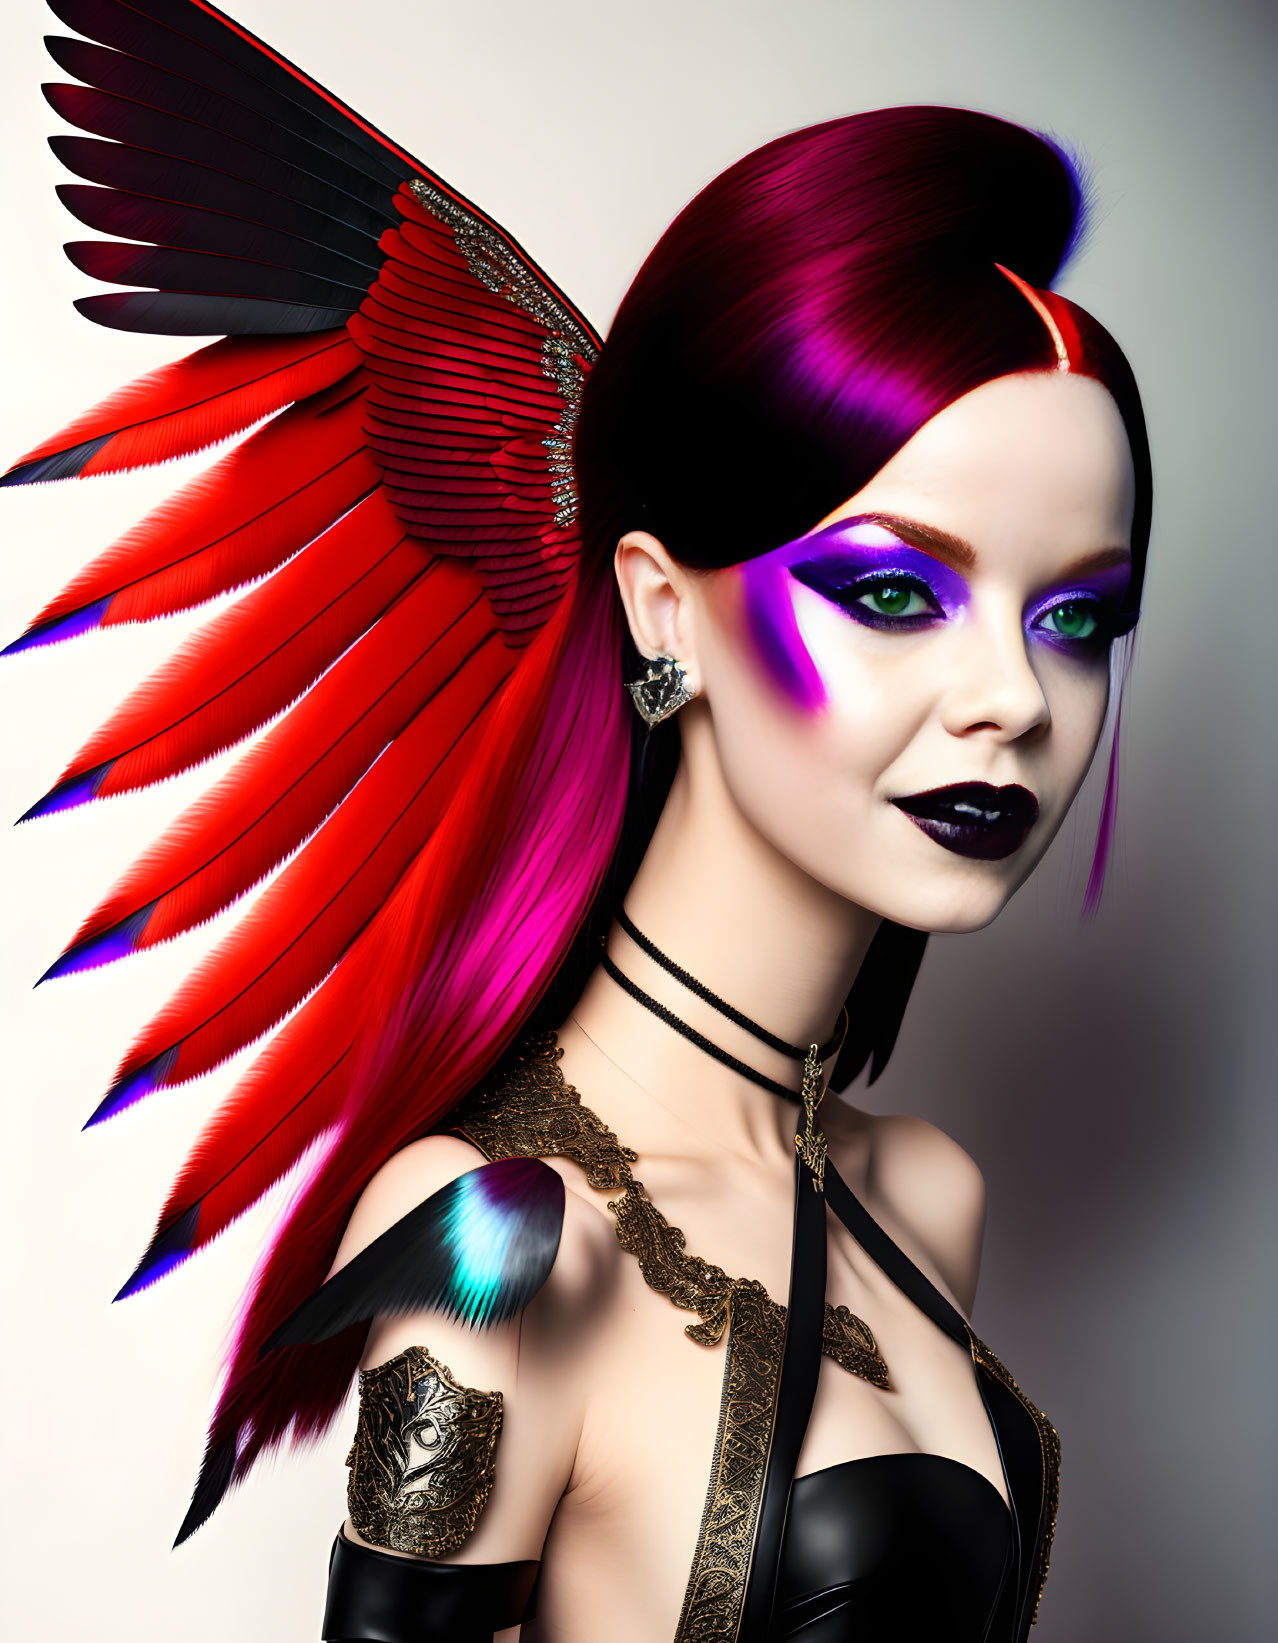 Portrait of a woman with red and black feathered wings and purple eye makeup